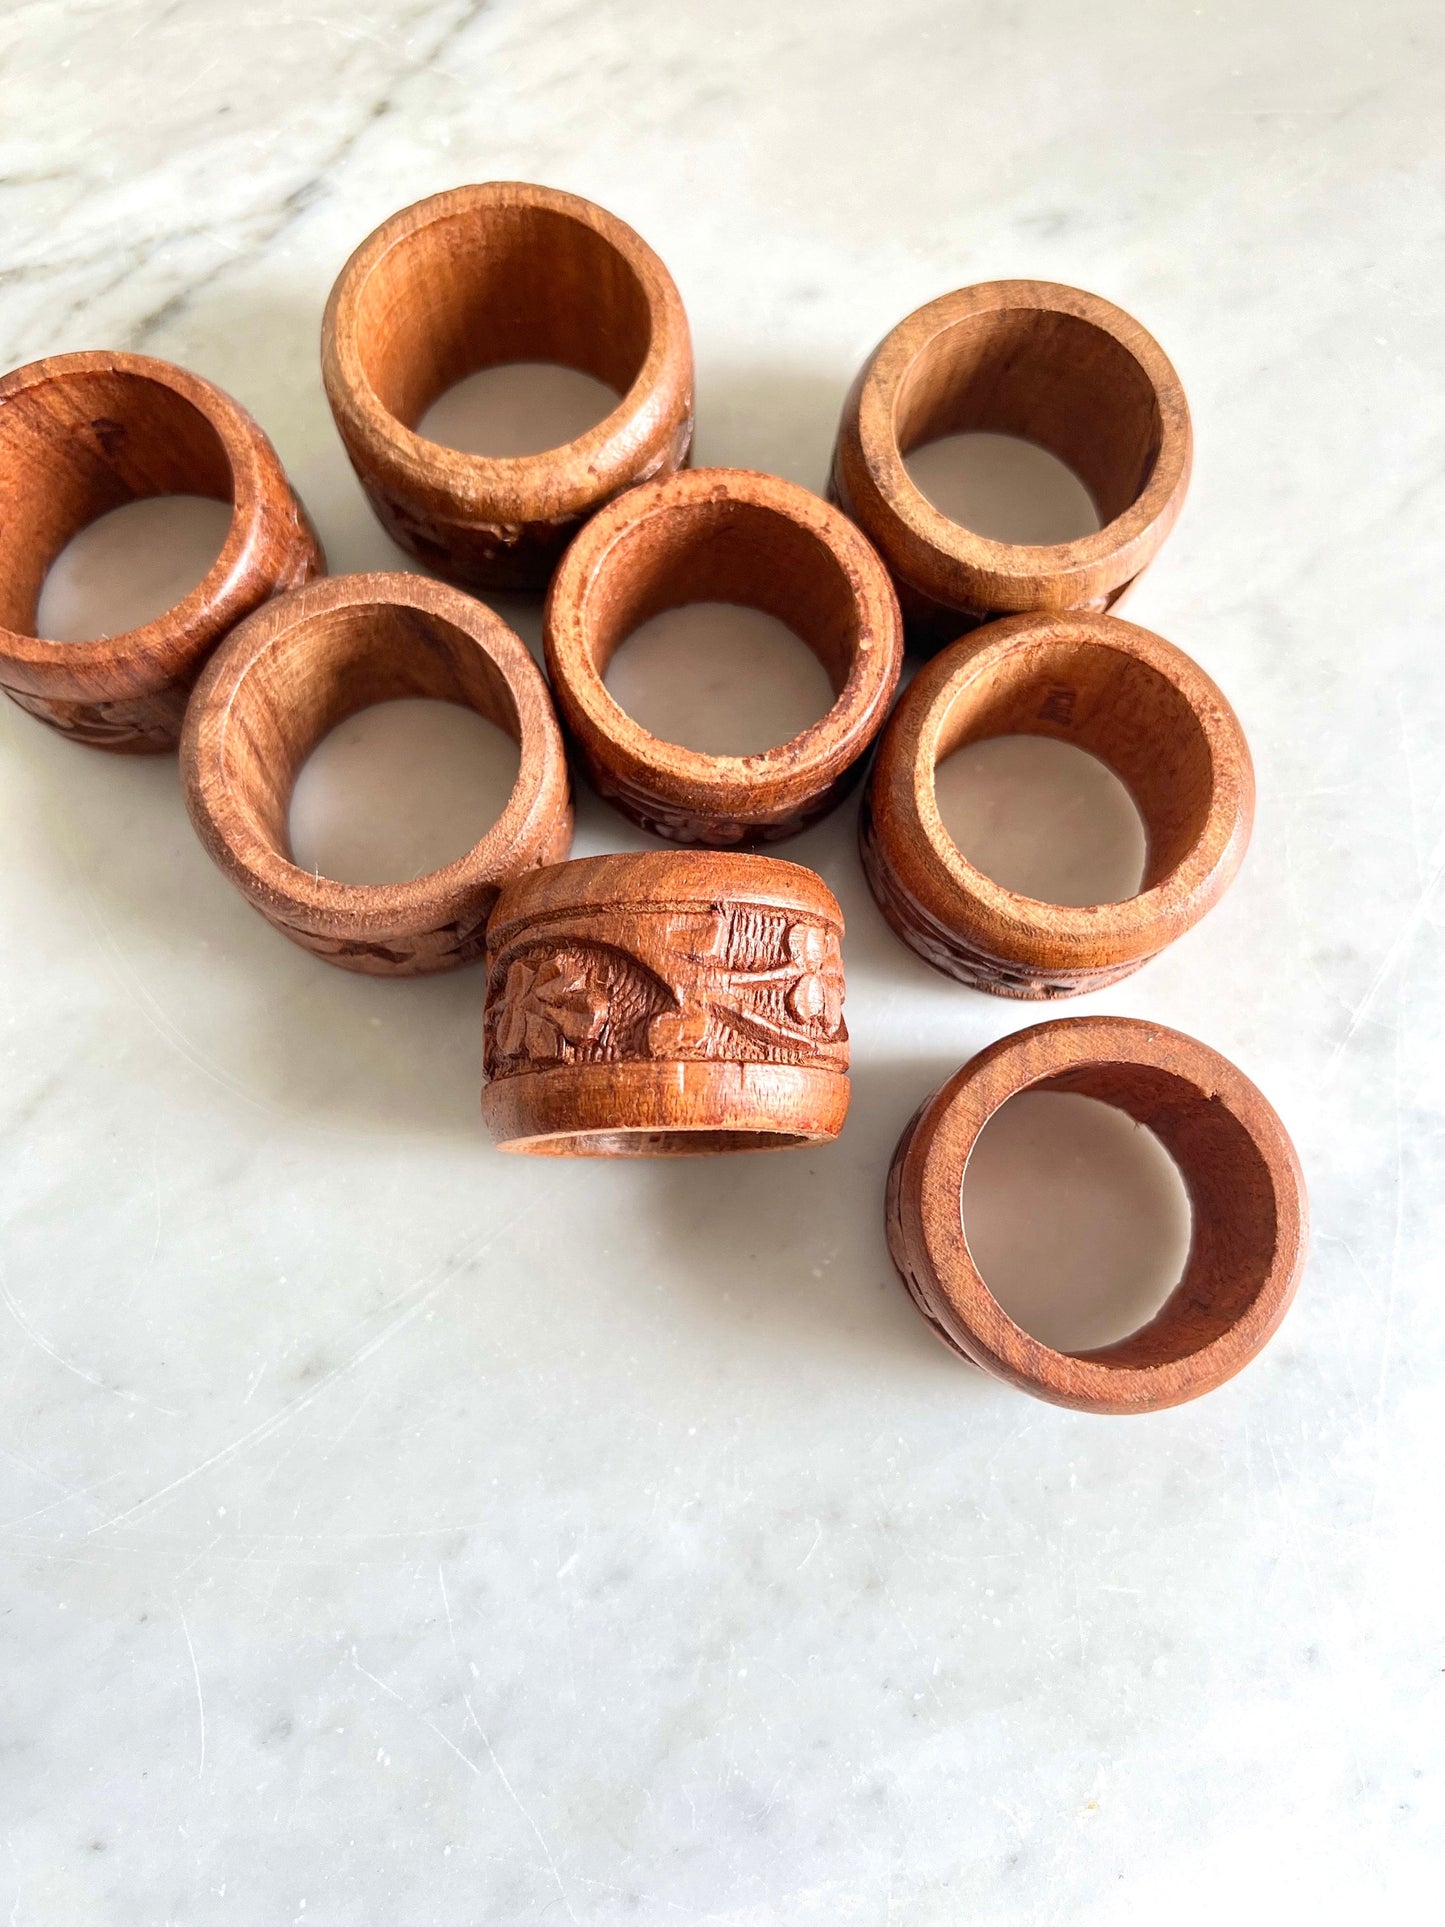 8 Vintage Wooden Napkin Rings Made in India